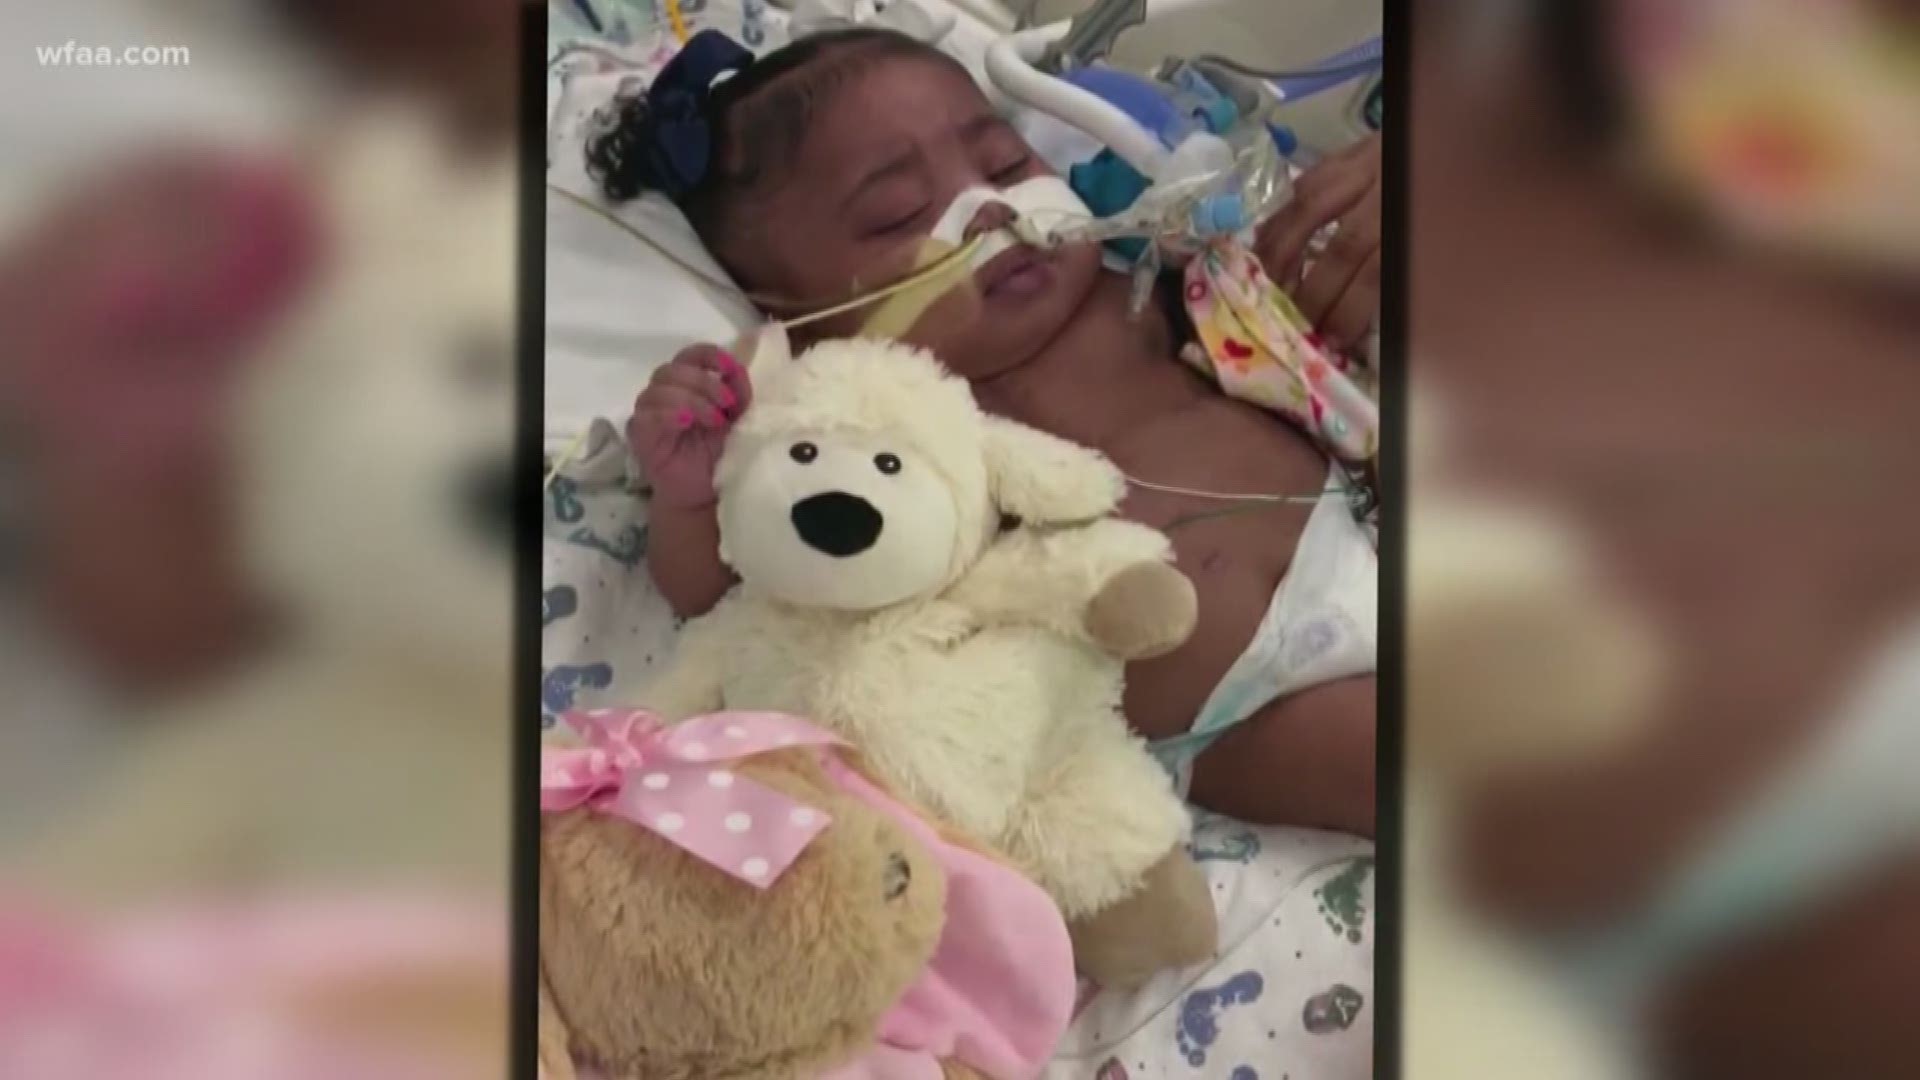 The family of 9-month-old Tinslee Lewis has been granted a temporary restraining order that will protect the baby from being taken off life support.